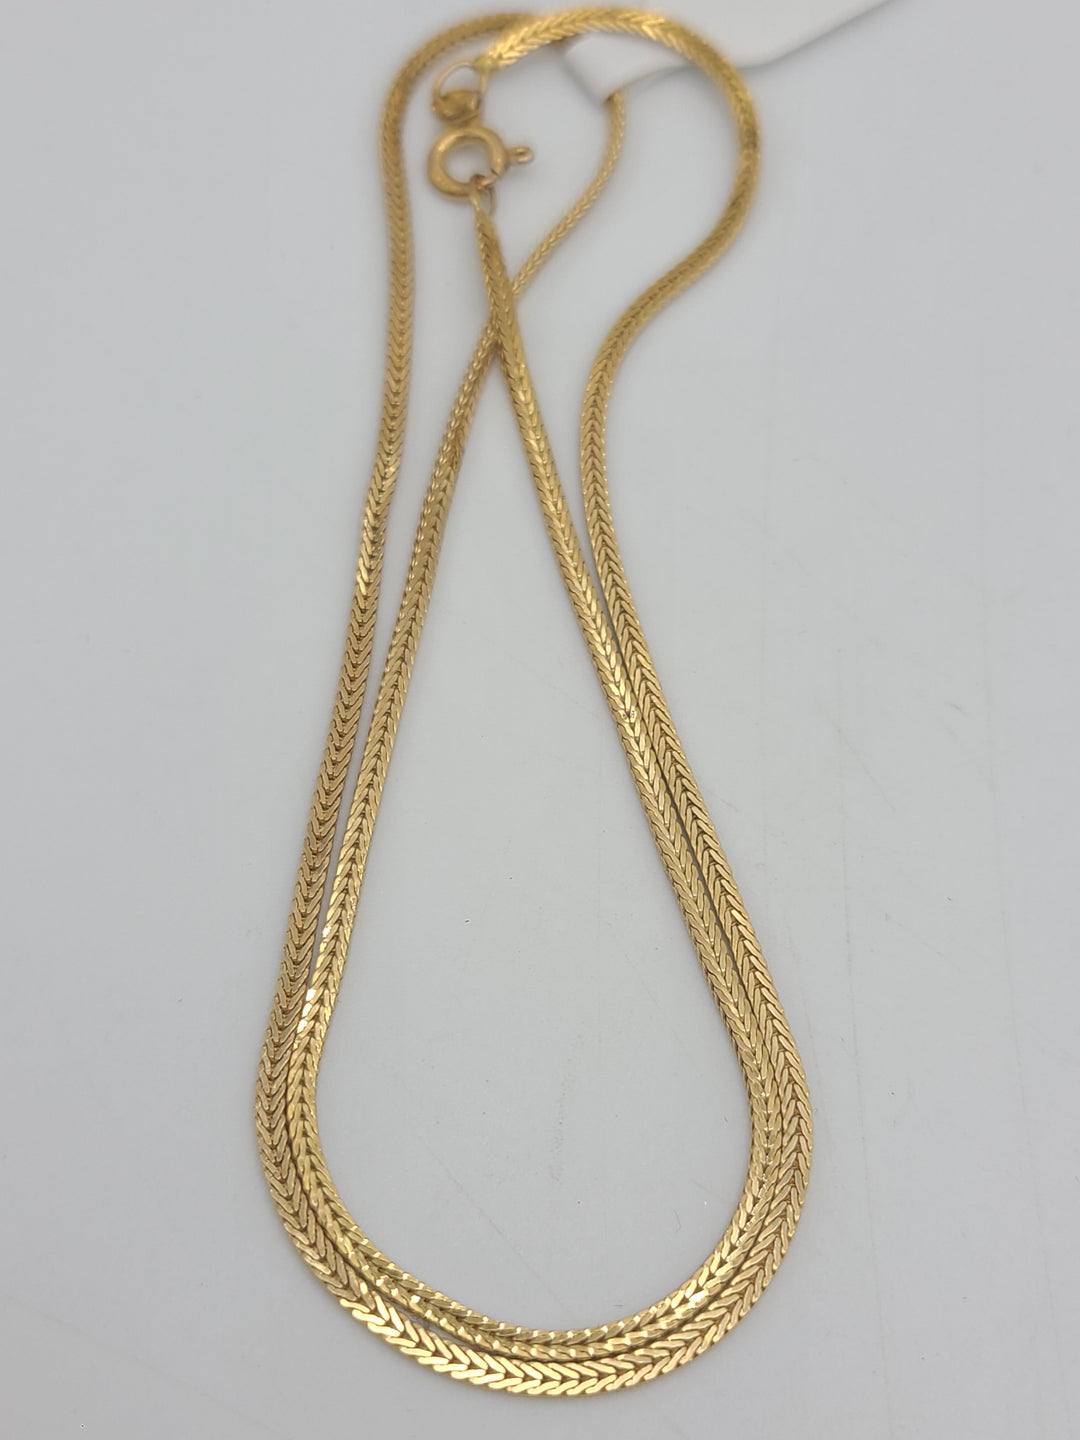 k812 Stunning Unisex 14kt Yellow Gold 18" Foxtail Necklace